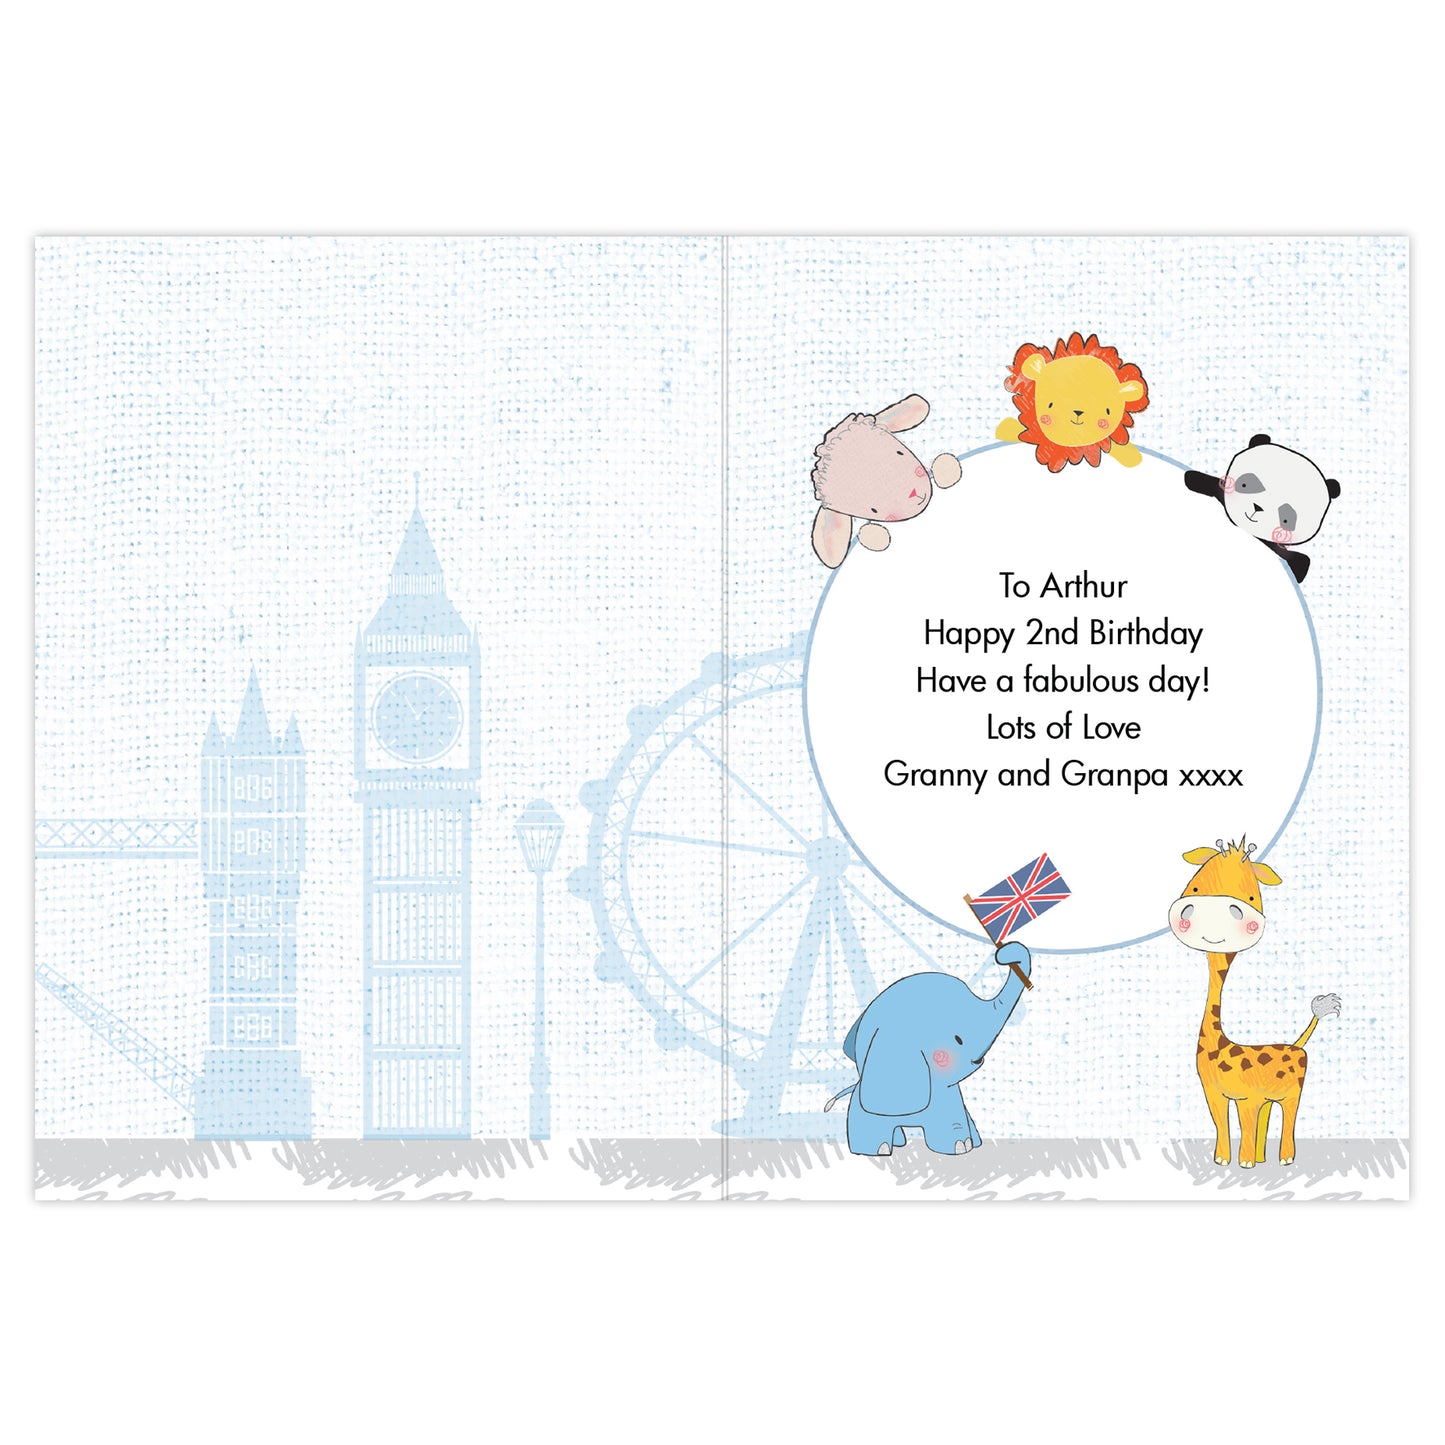 Personalised London Animal Bus Birthday Card Add Any Name - Personalise It!